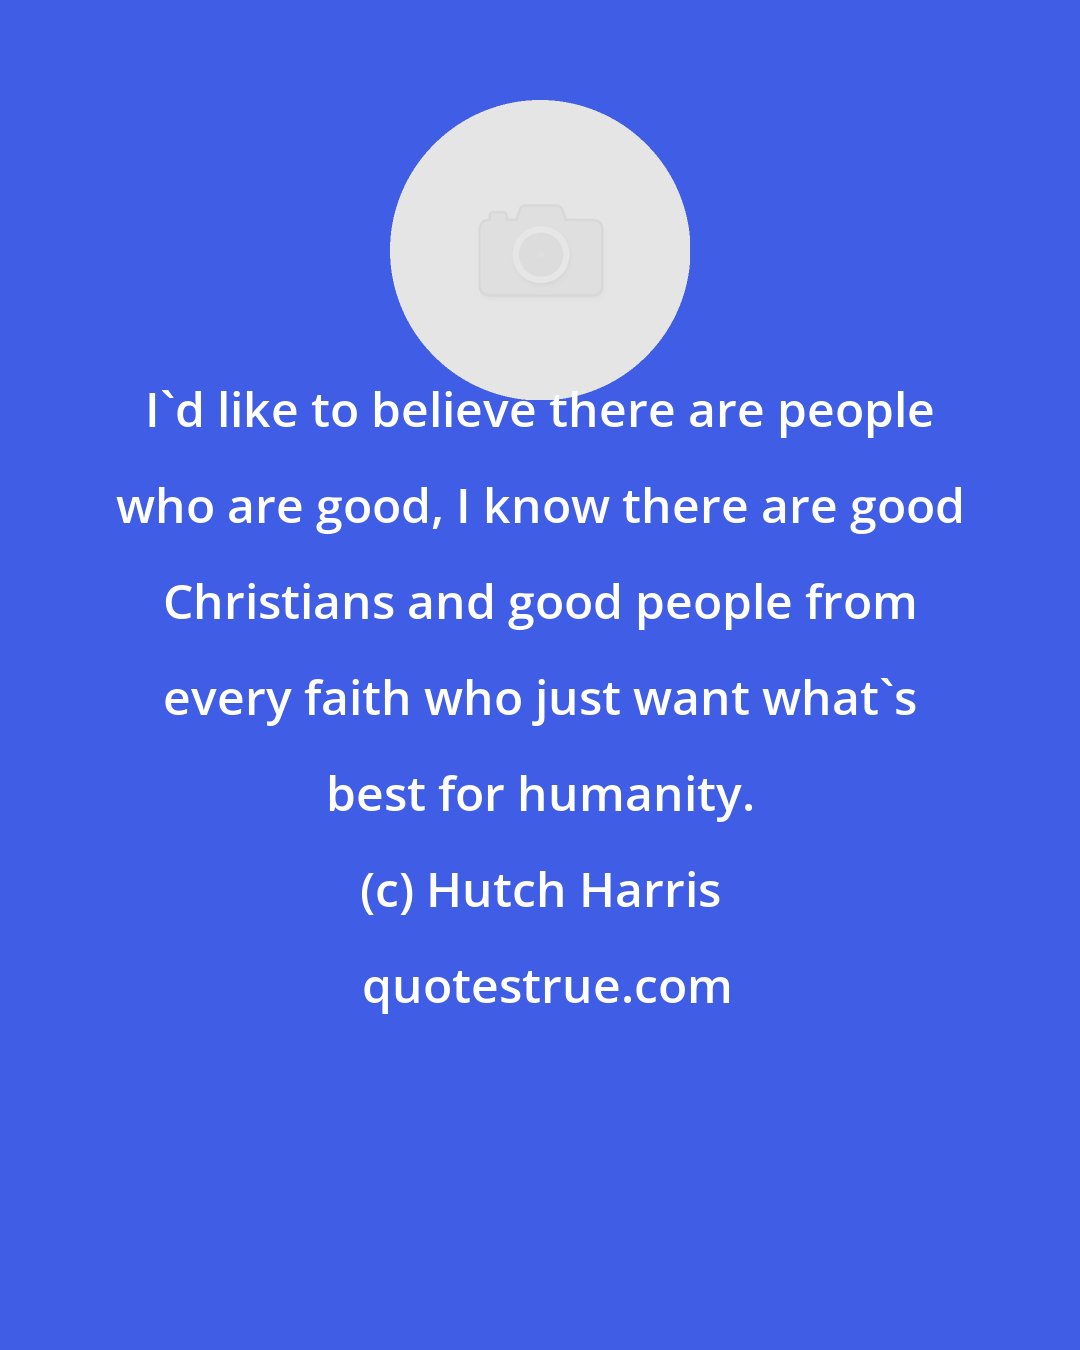 Hutch Harris: I'd like to believe there are people who are good, I know there are good Christians and good people from every faith who just want what's best for humanity.